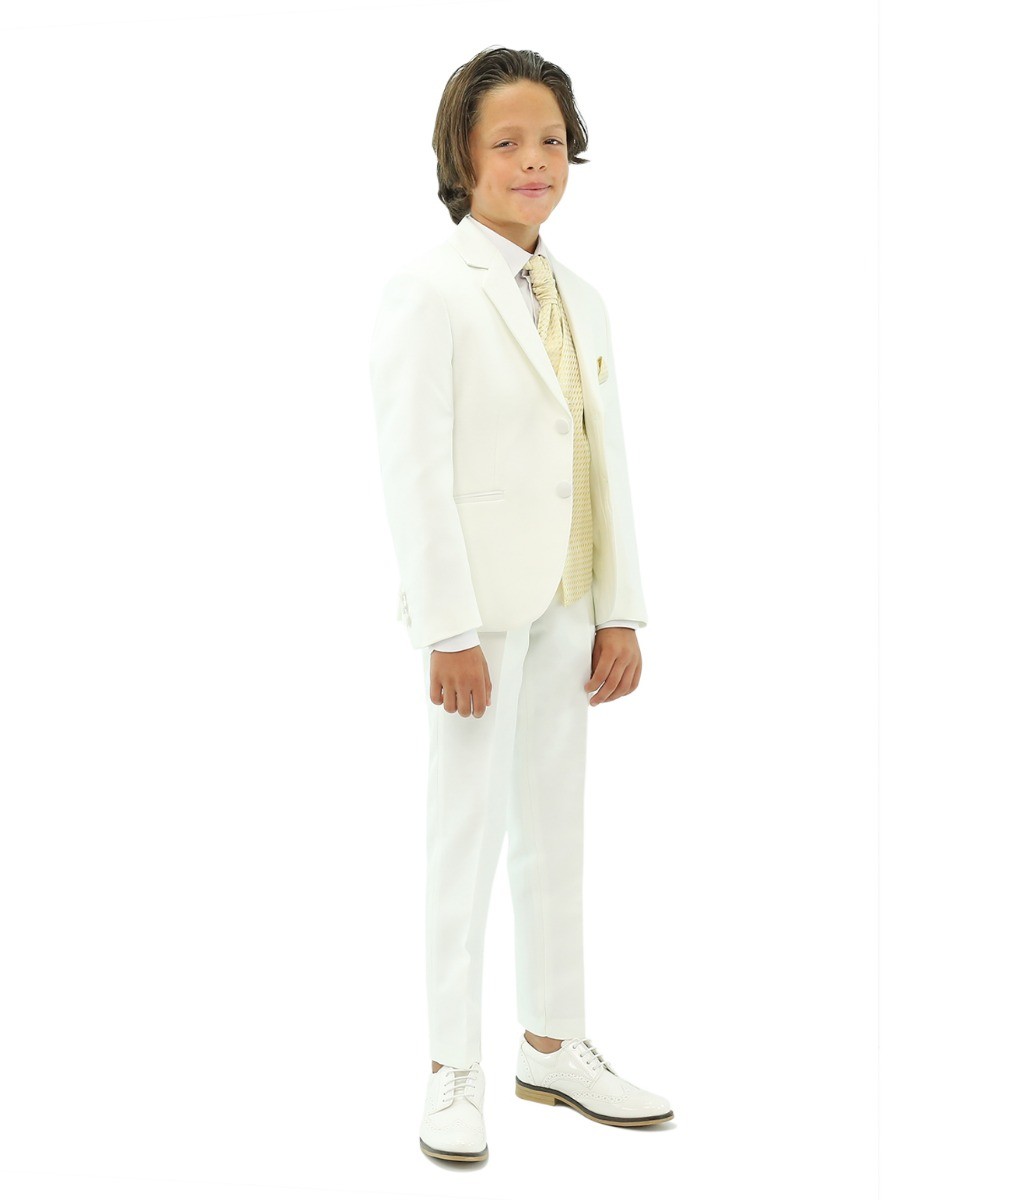 Boys White Suit with Gold Vest and Cravate Set